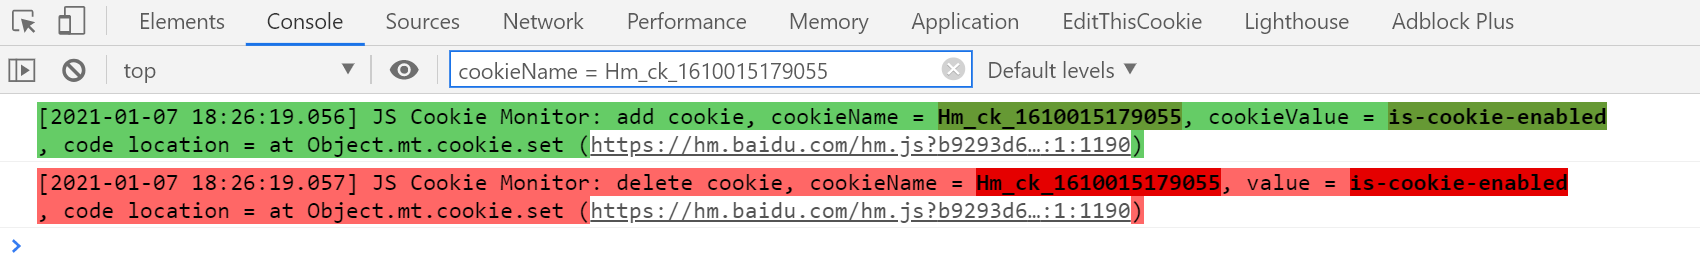 https://raw.githubusercontent.com/JSREI/js-cookie-monitor-debugger-hook/main/images/img_9.png